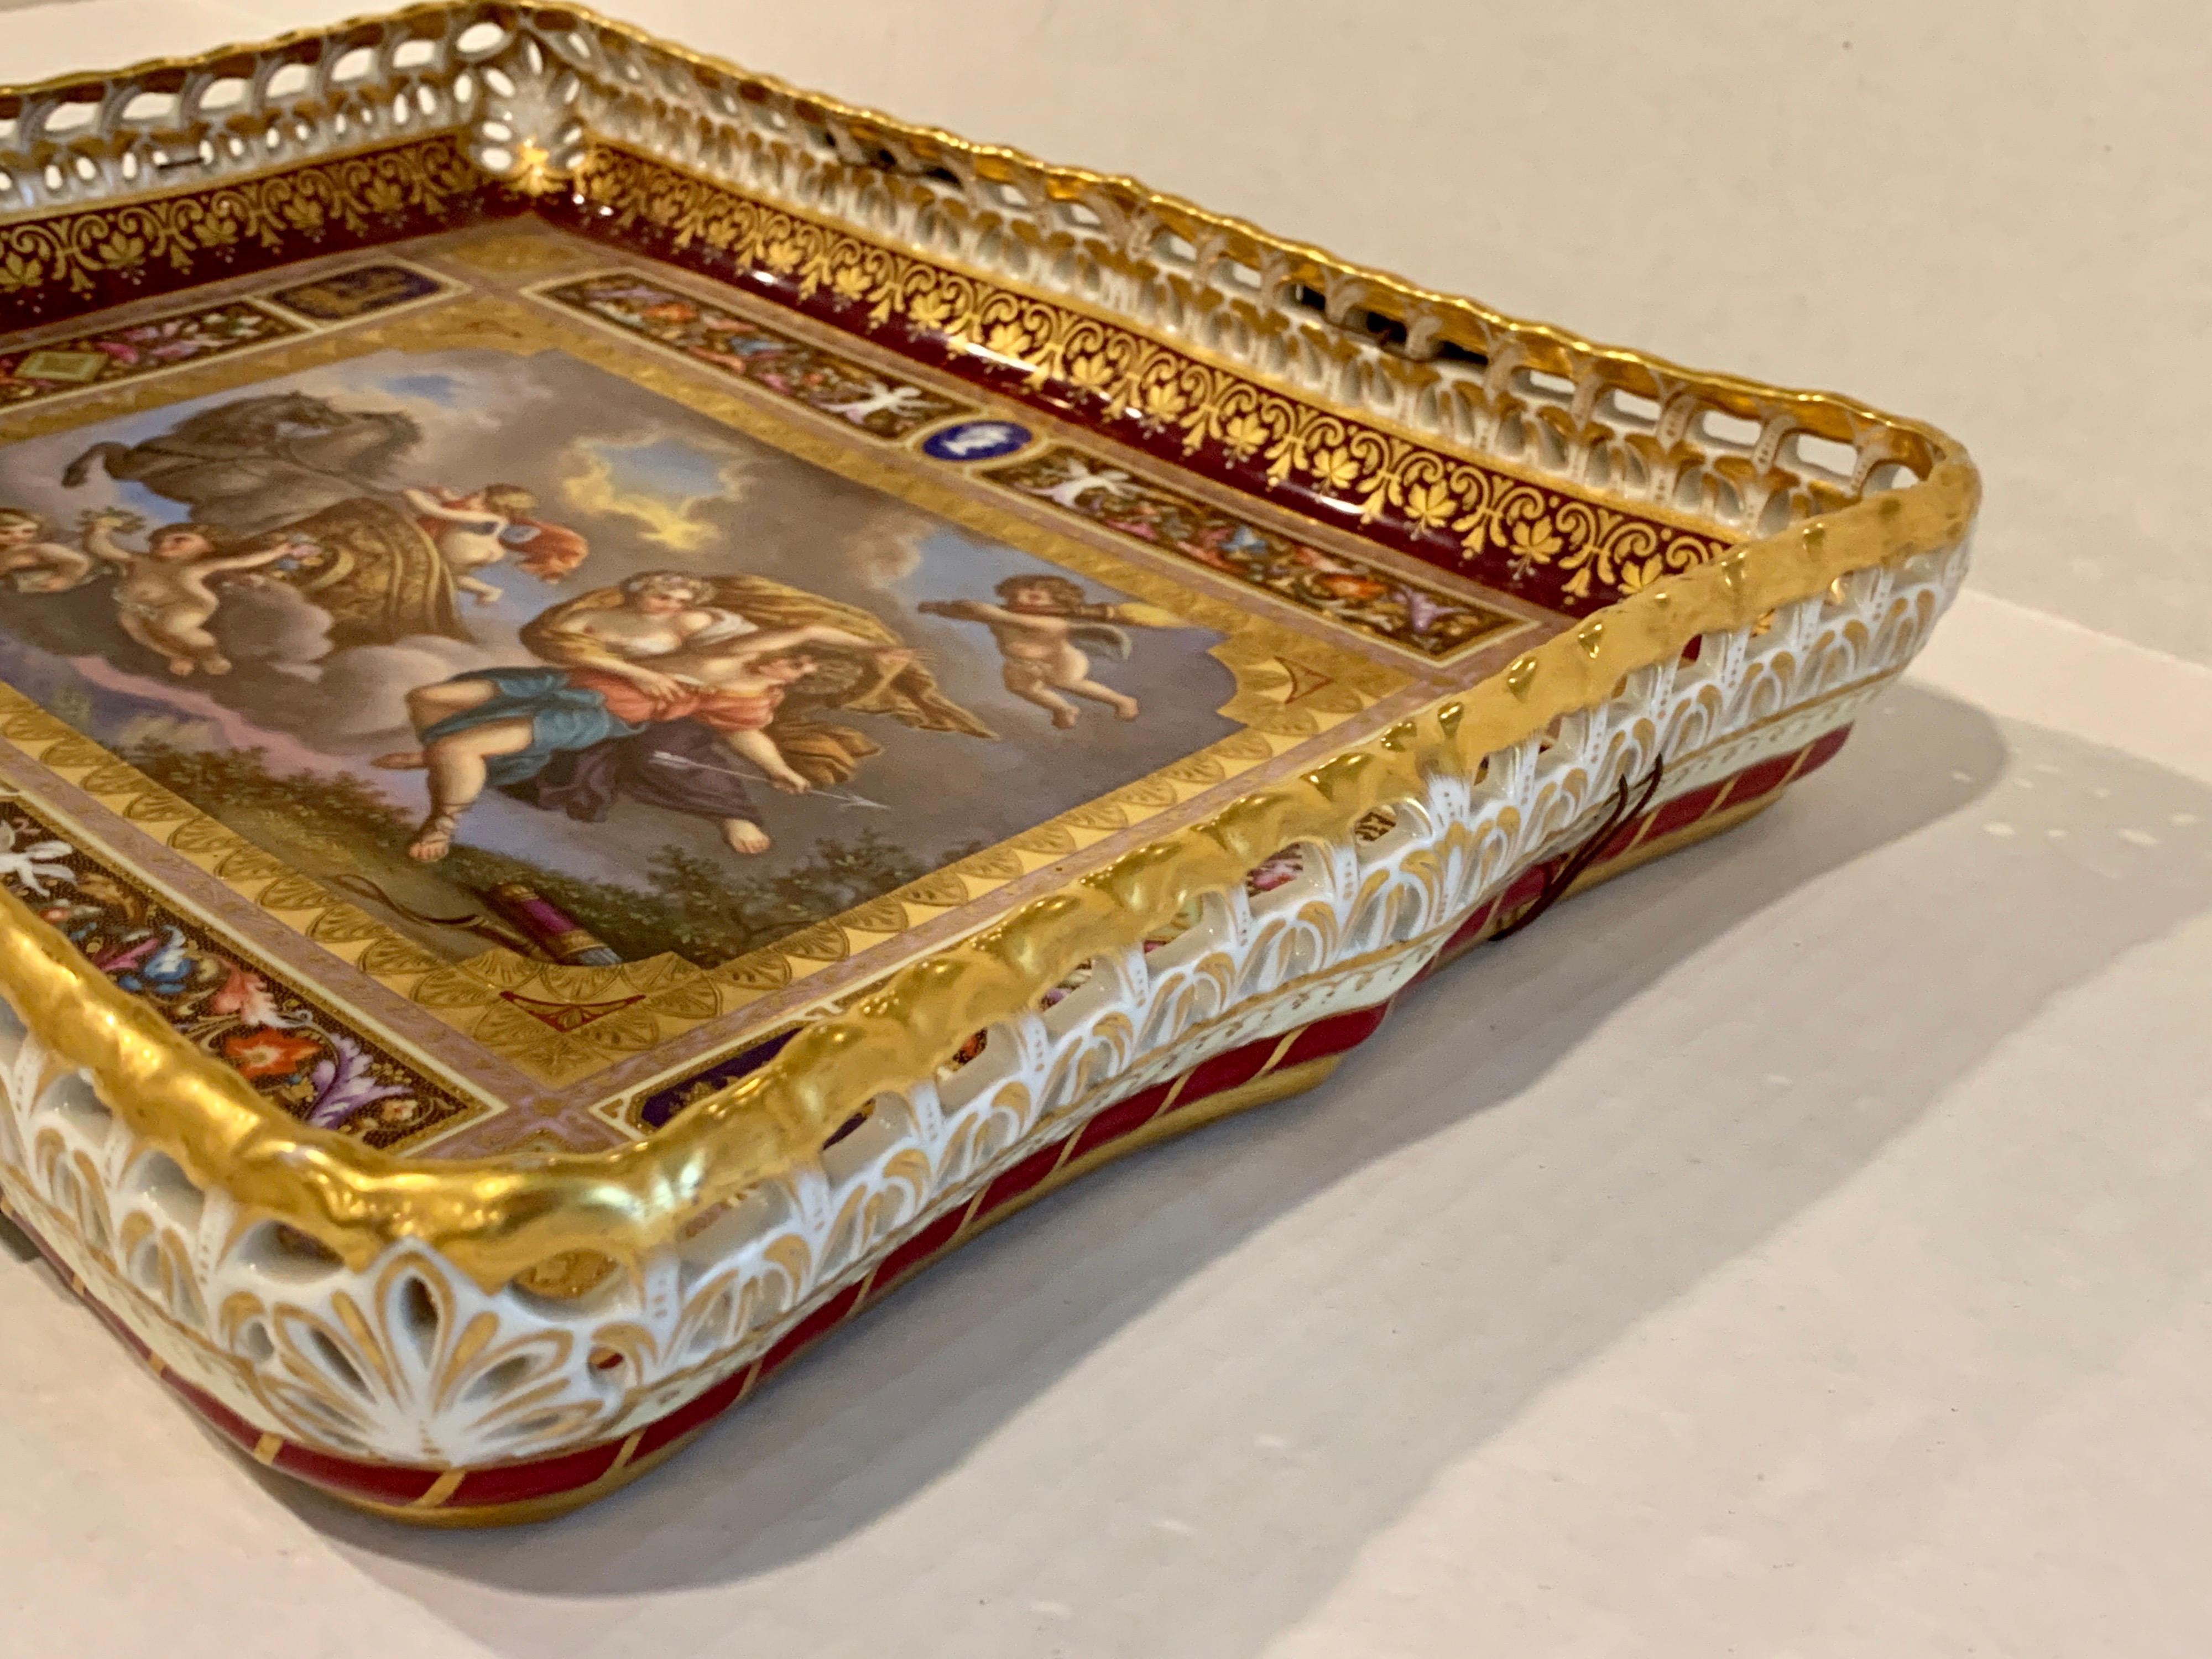 19th Century Royal Vienna Pierced Tray Depicting Cupid and the Charriot of Venus